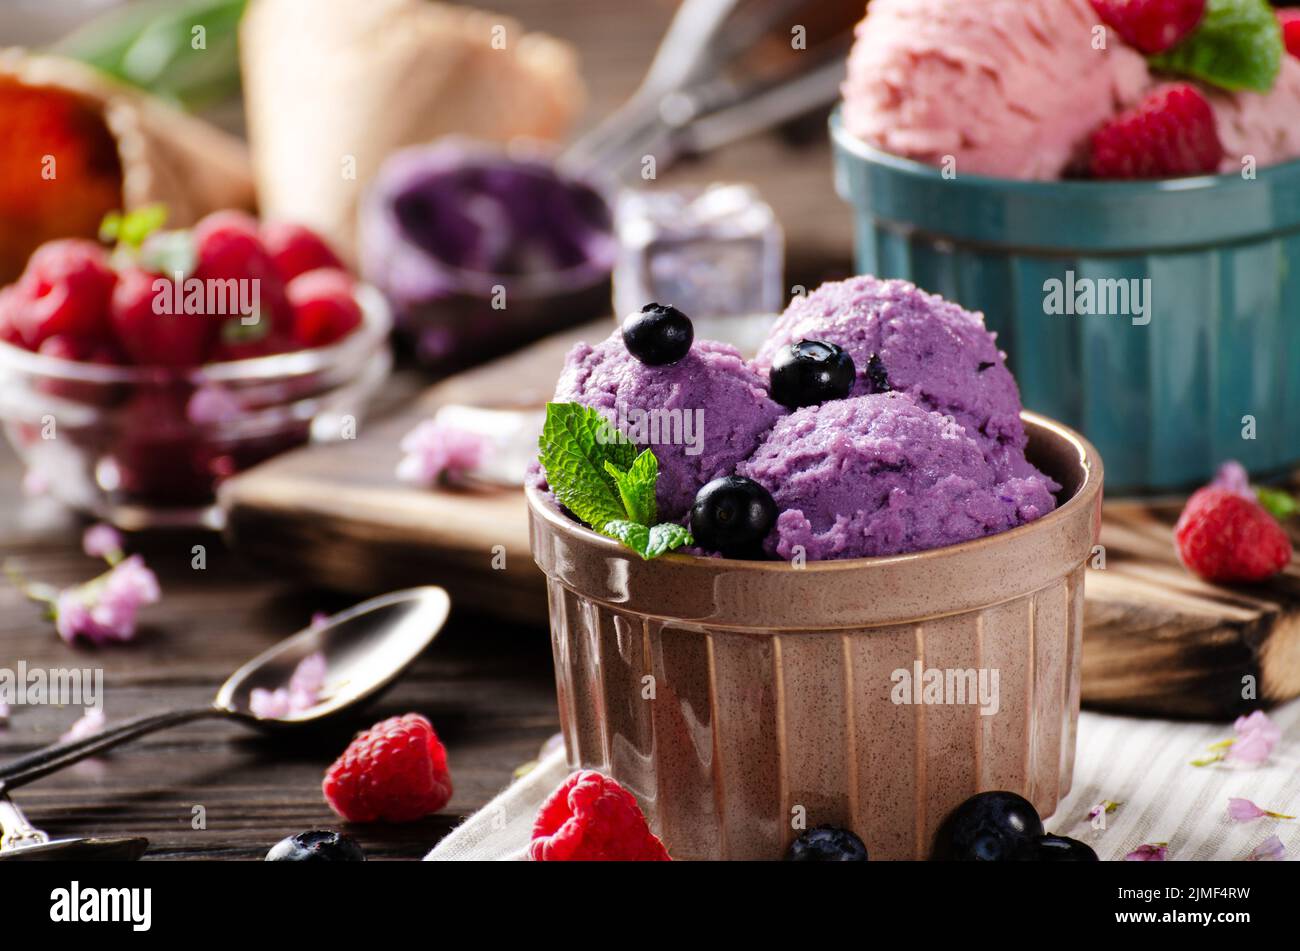 Blackberry icecream balls in clay bowls on wooden kitchen table with flowers and berries aside Stock Photo